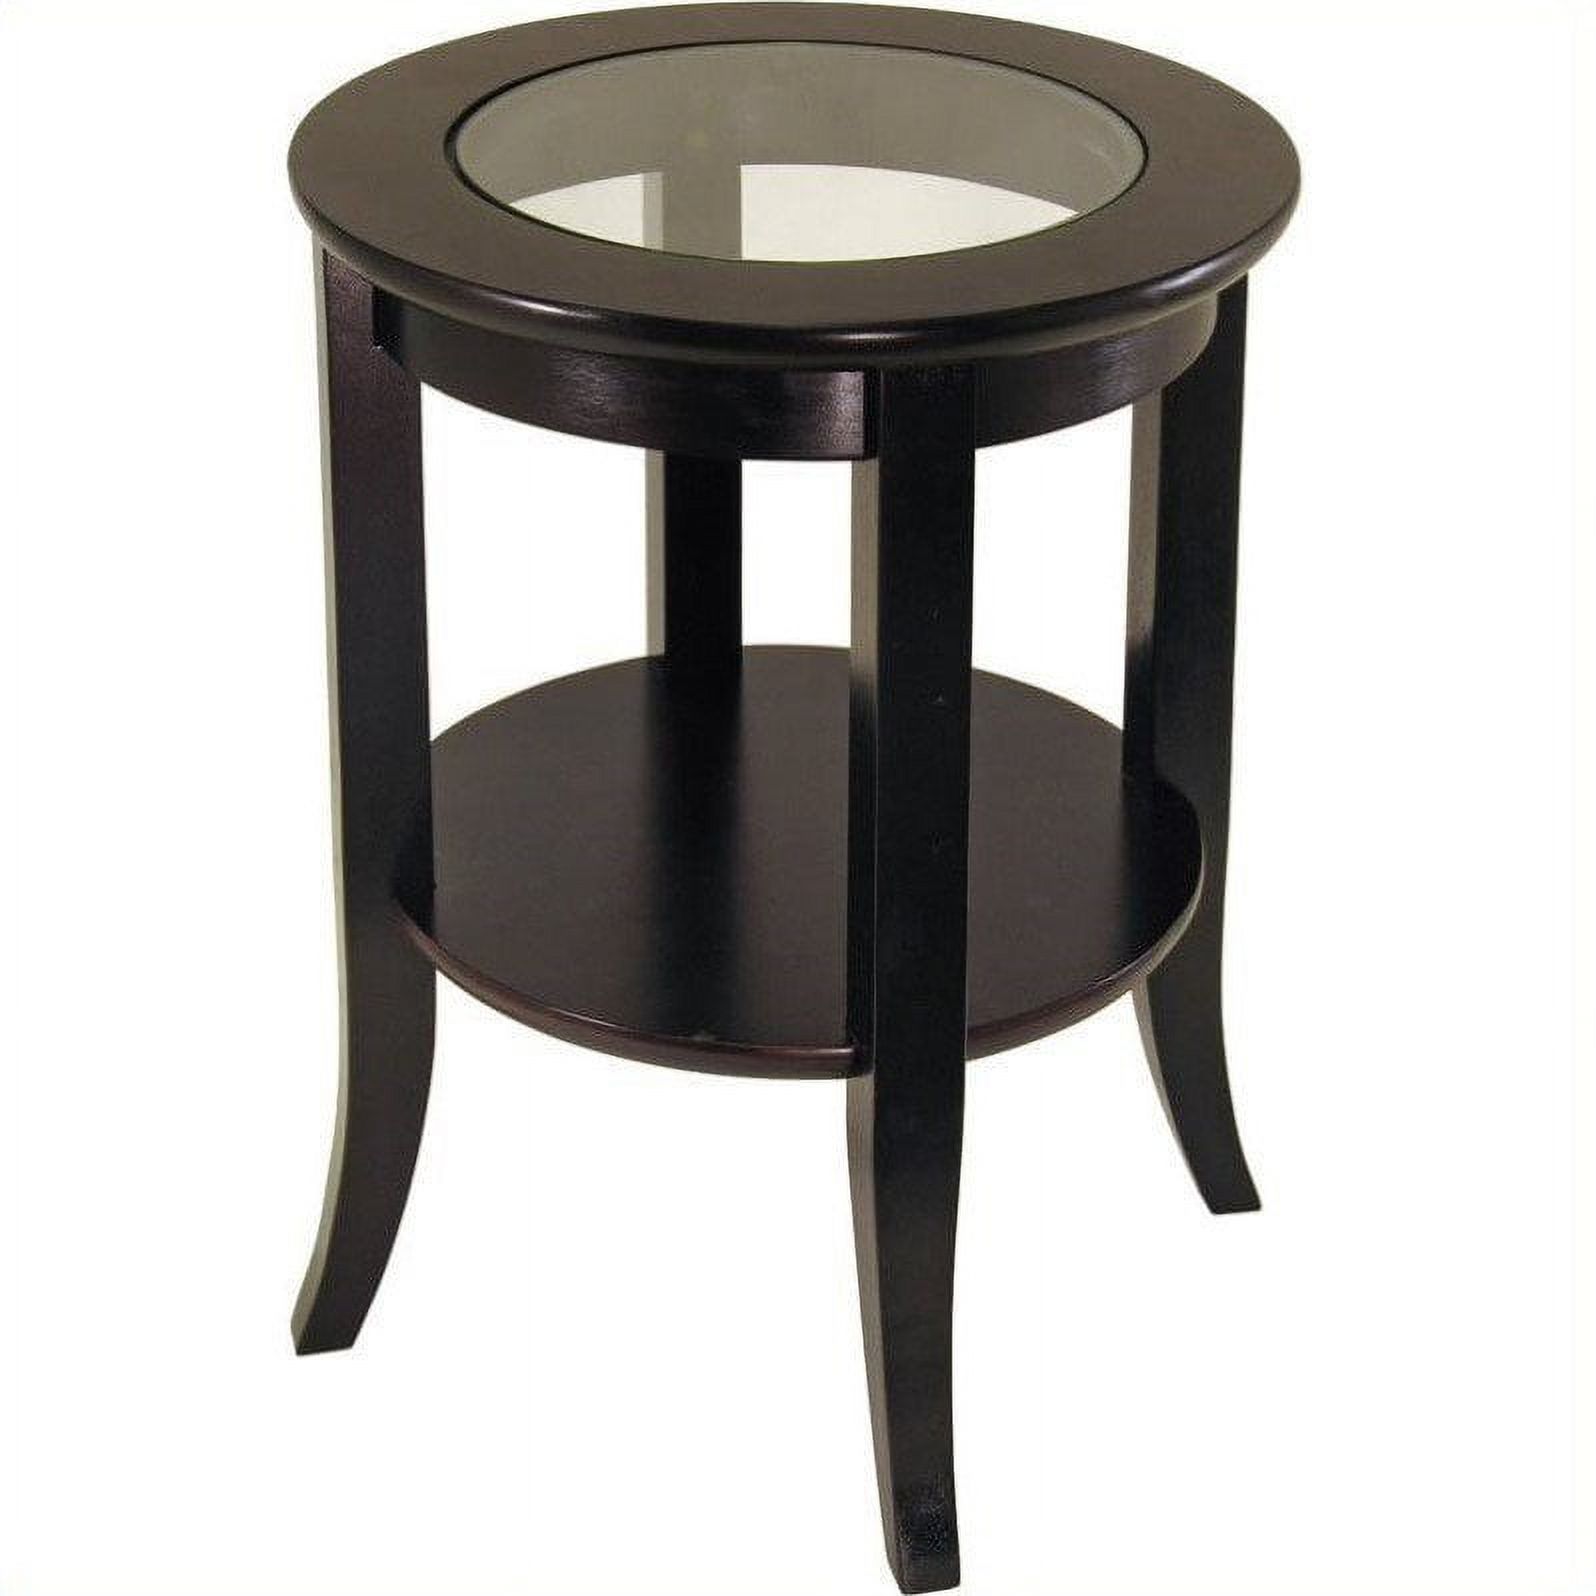 Winsome Wood Genoa Round End Table with Glass Top, Espresso Finish - image 1 of 4